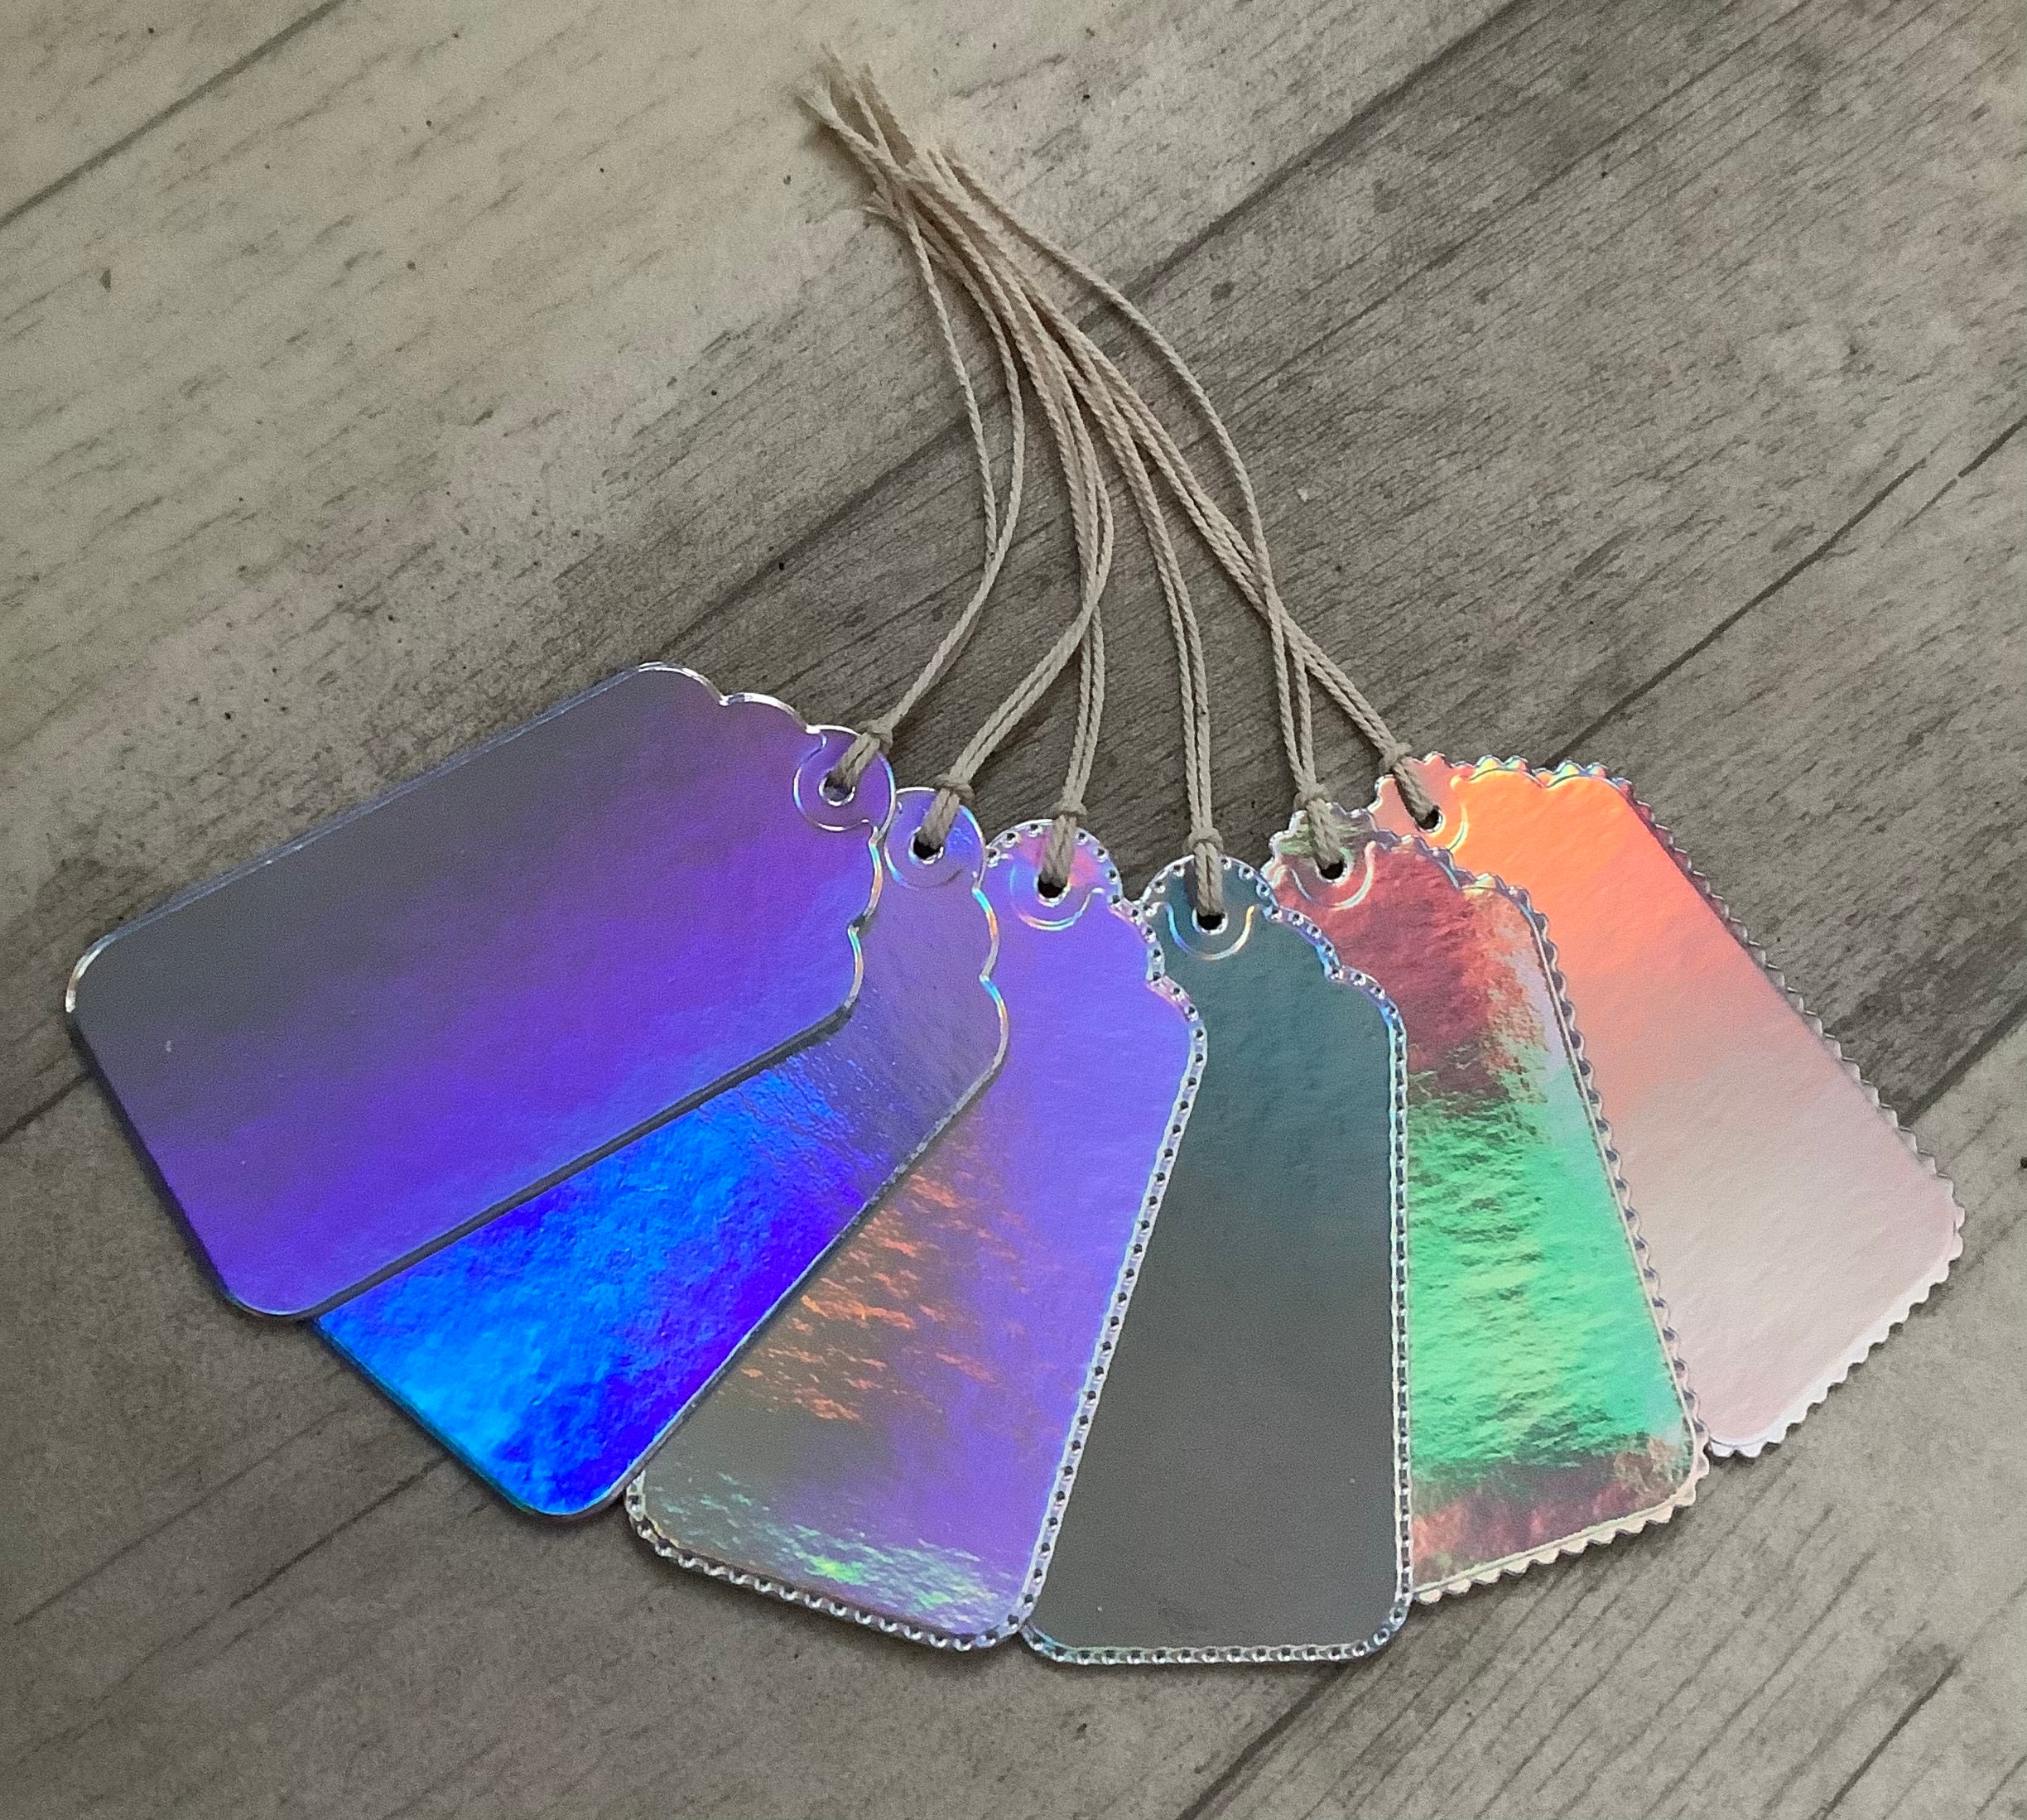 6 Luxury Hand Die Cut Holographic Christmas Gift Tags 300gsm